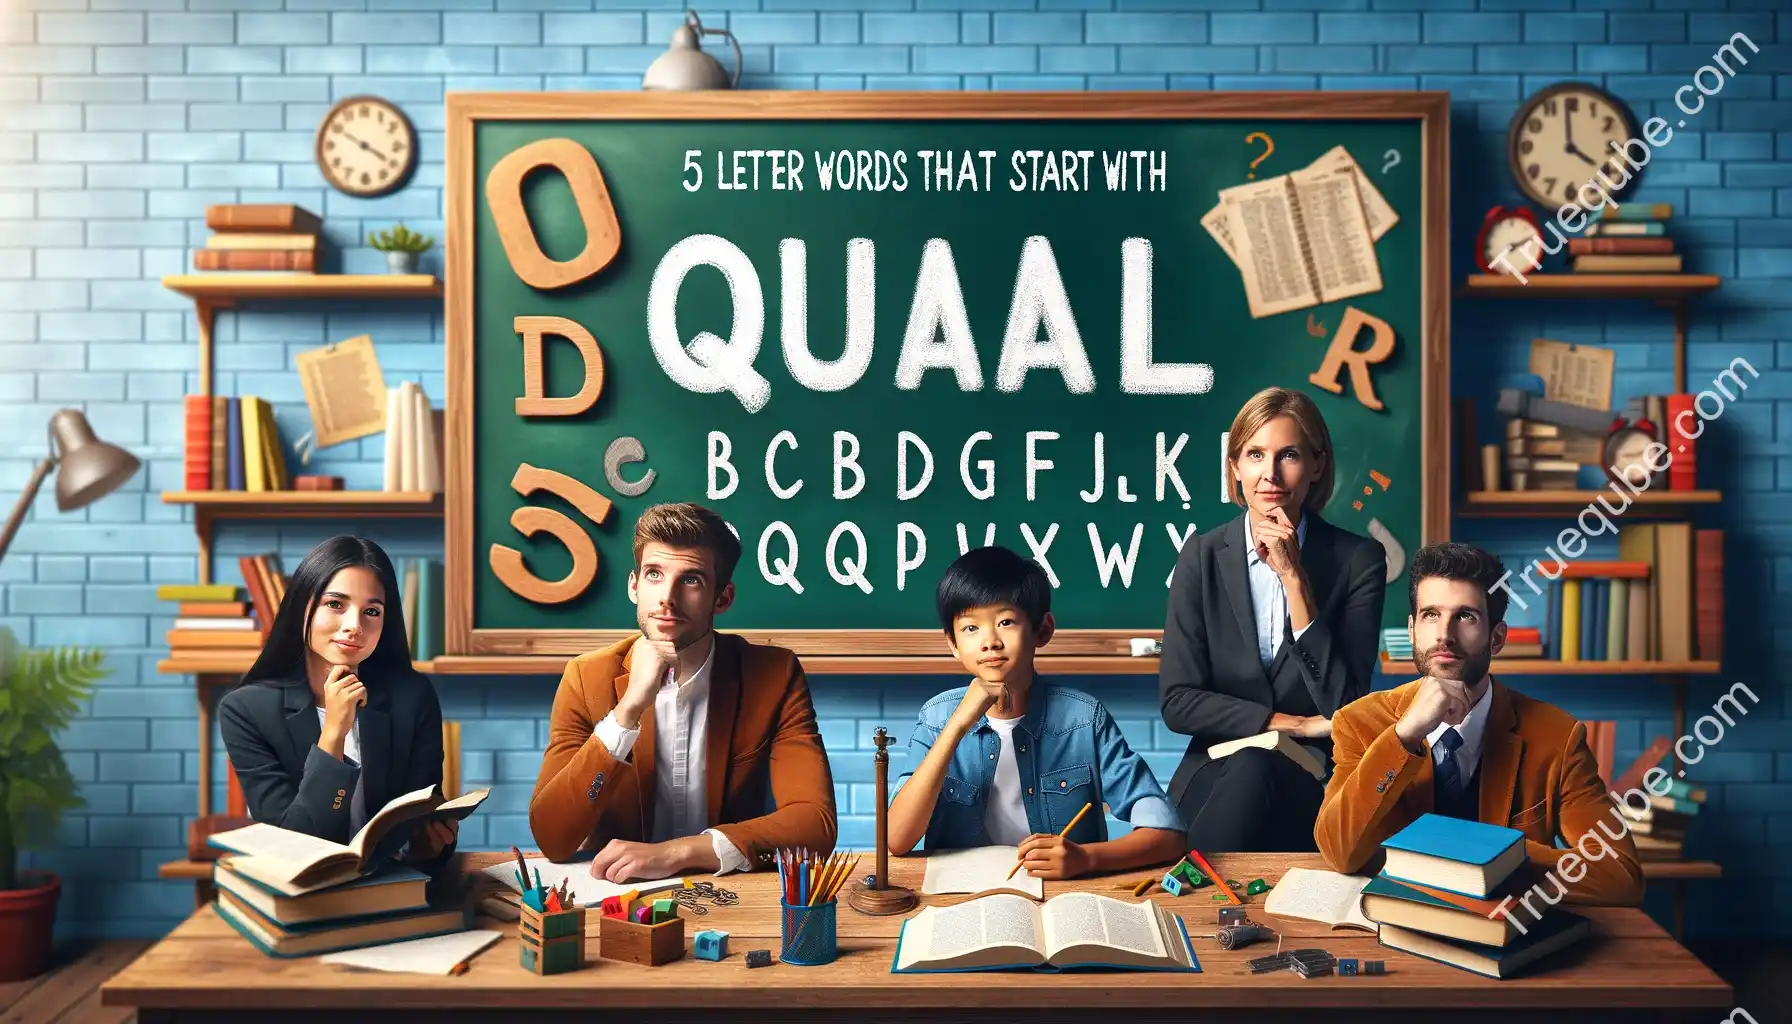 5 Letter Words that Start with Qual